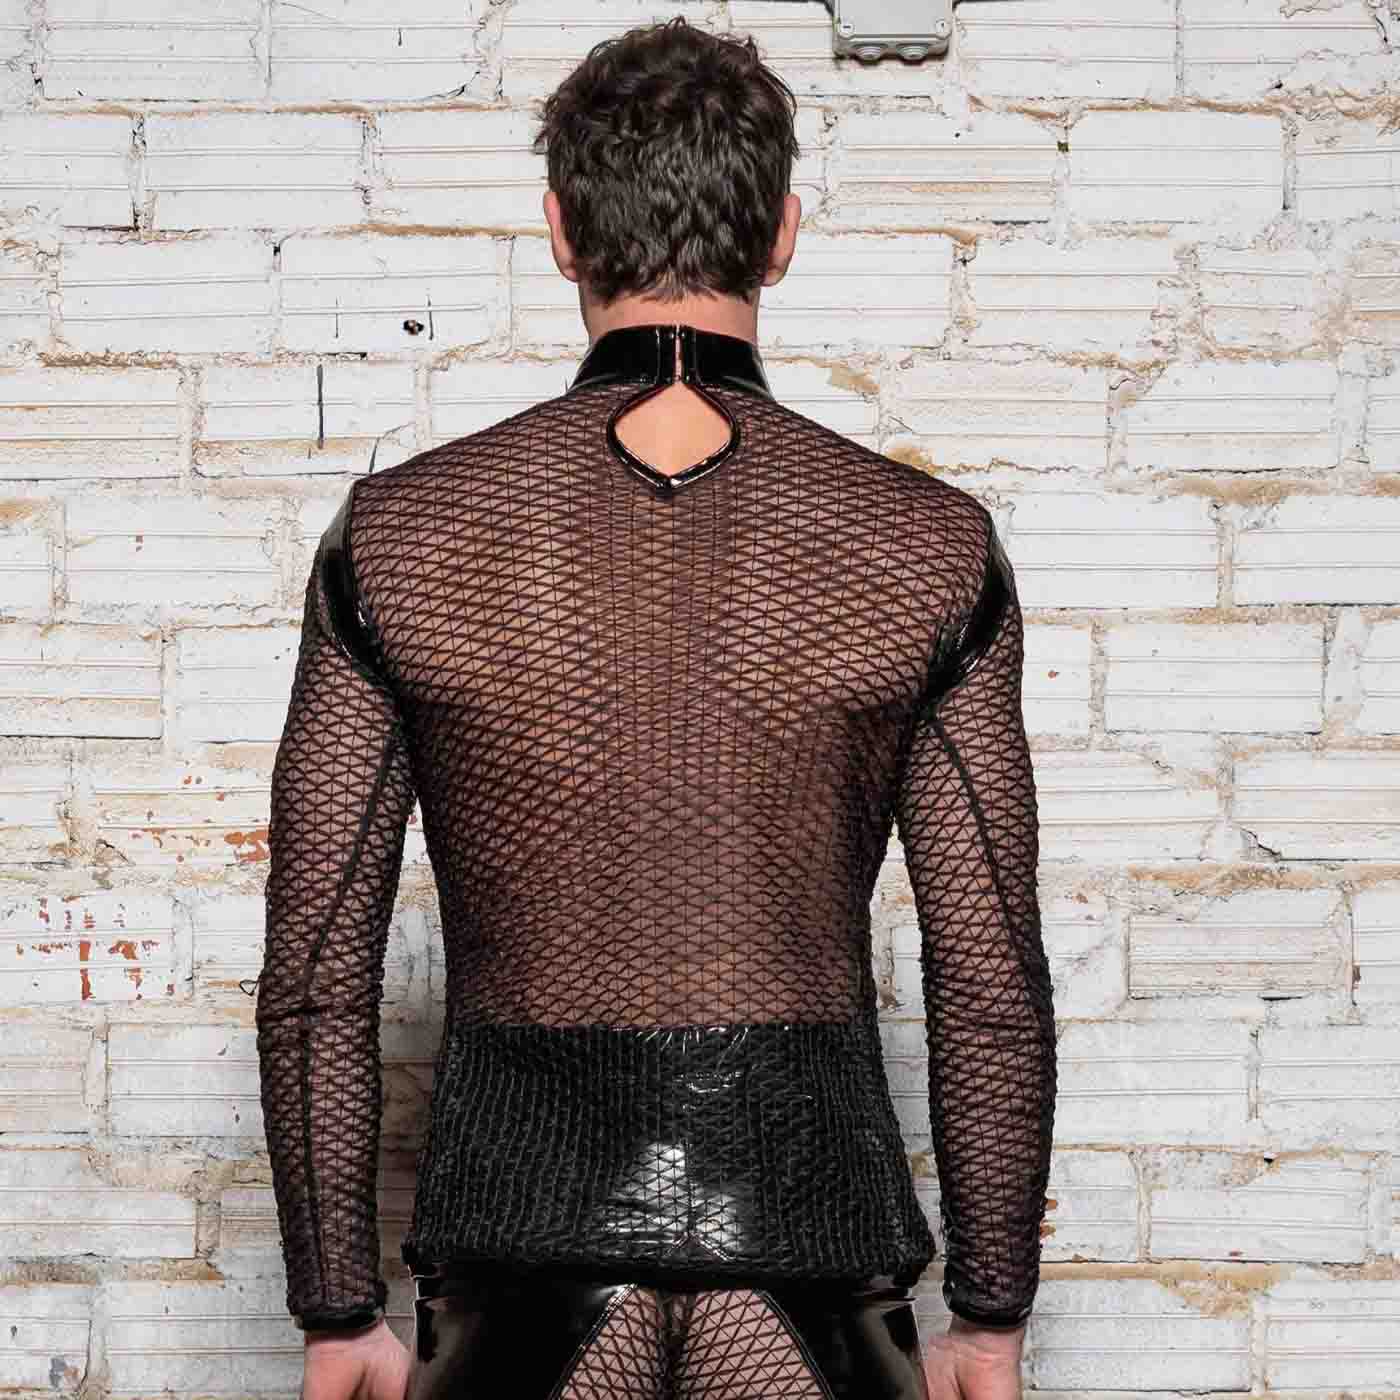 A model wearing the Leif Net & PatentT-Shirt with black patent and net shorts, rear view.